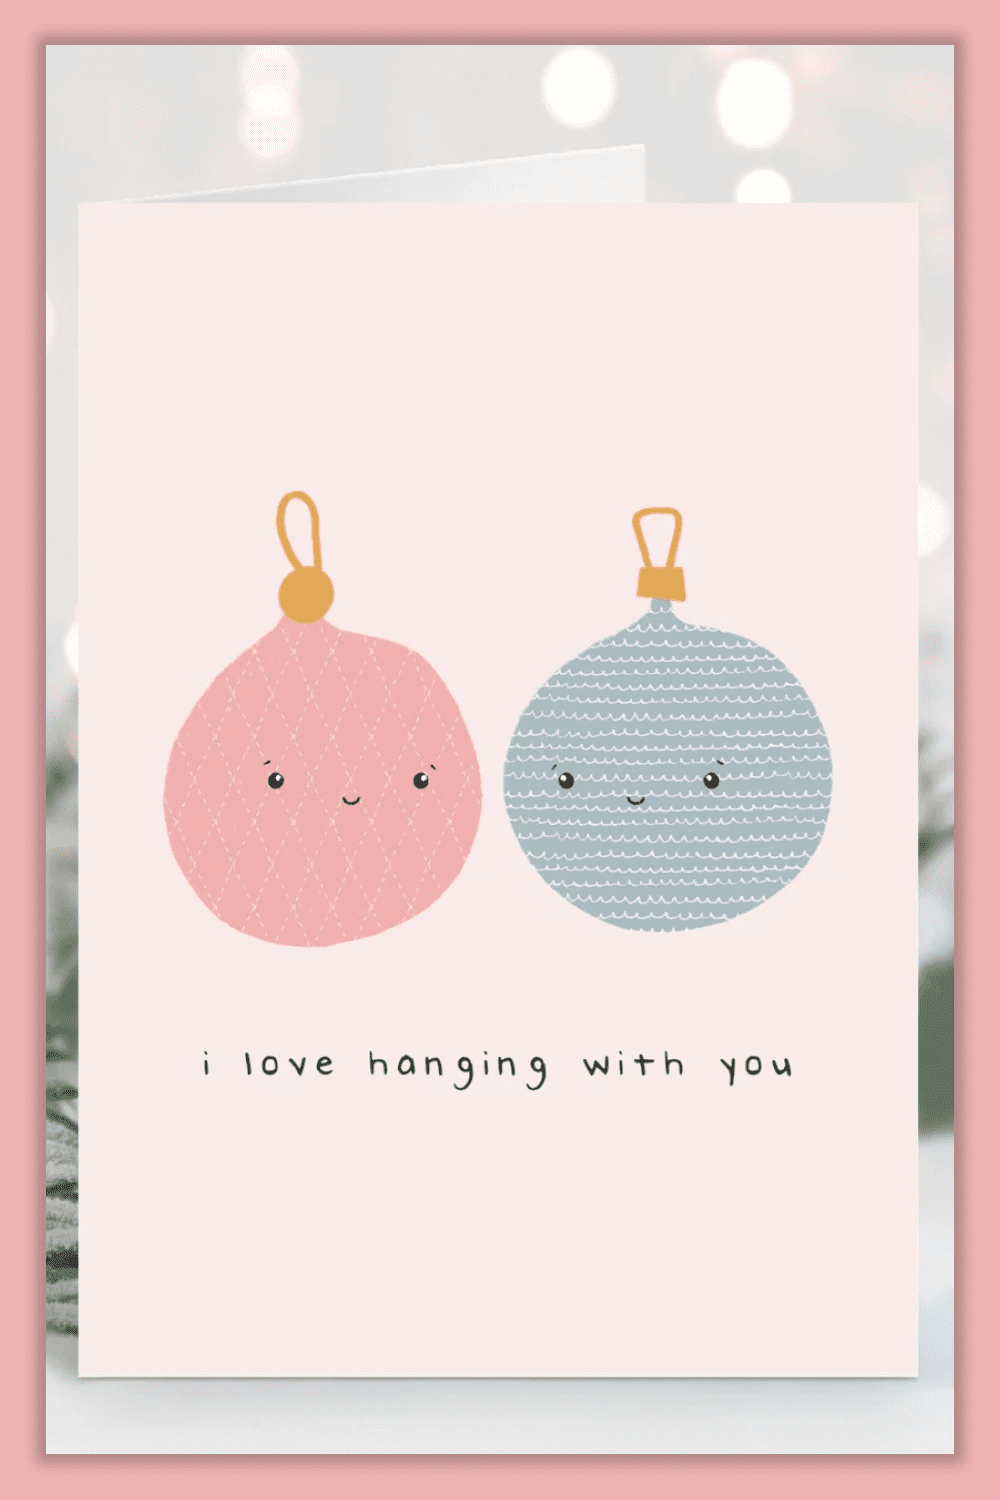 Card with painted Christmas balls in pink and gray with a cute inscription under them.